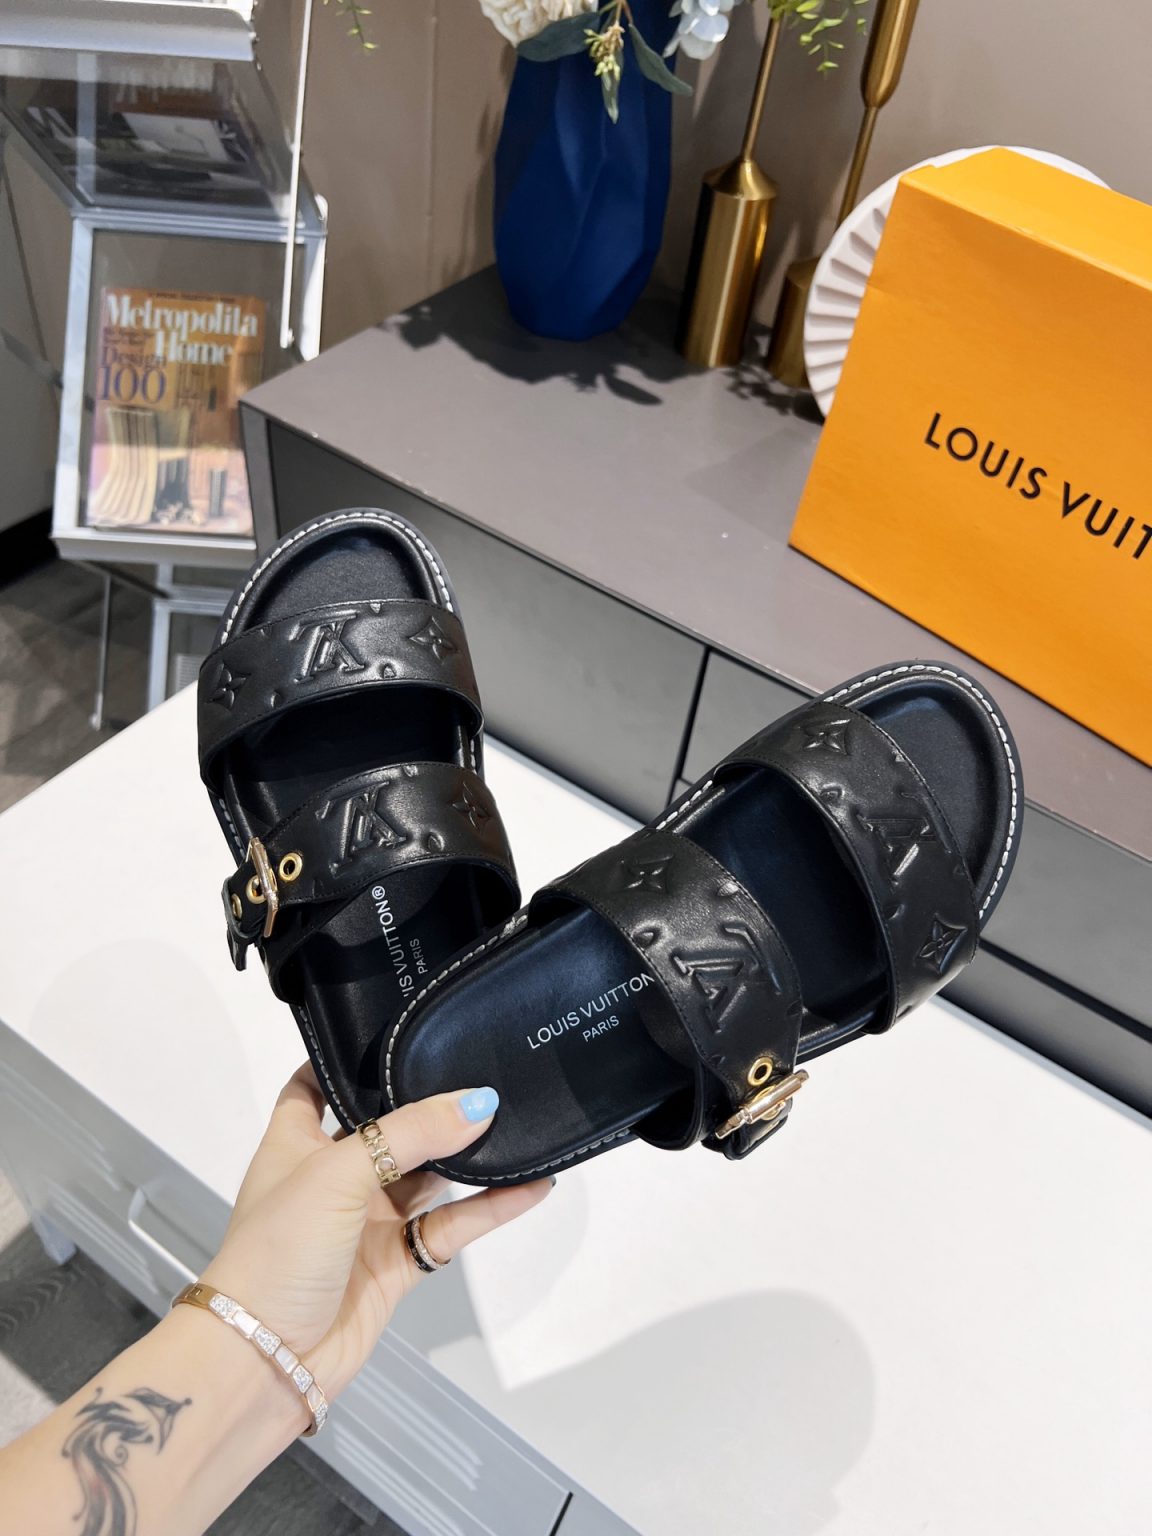 Bom Dia Mules - For Sale on 1stDibs  louis vuitton bom dia mule, louis  vuitton bom dia flat mule, louis vuitton bom dia mule on feet